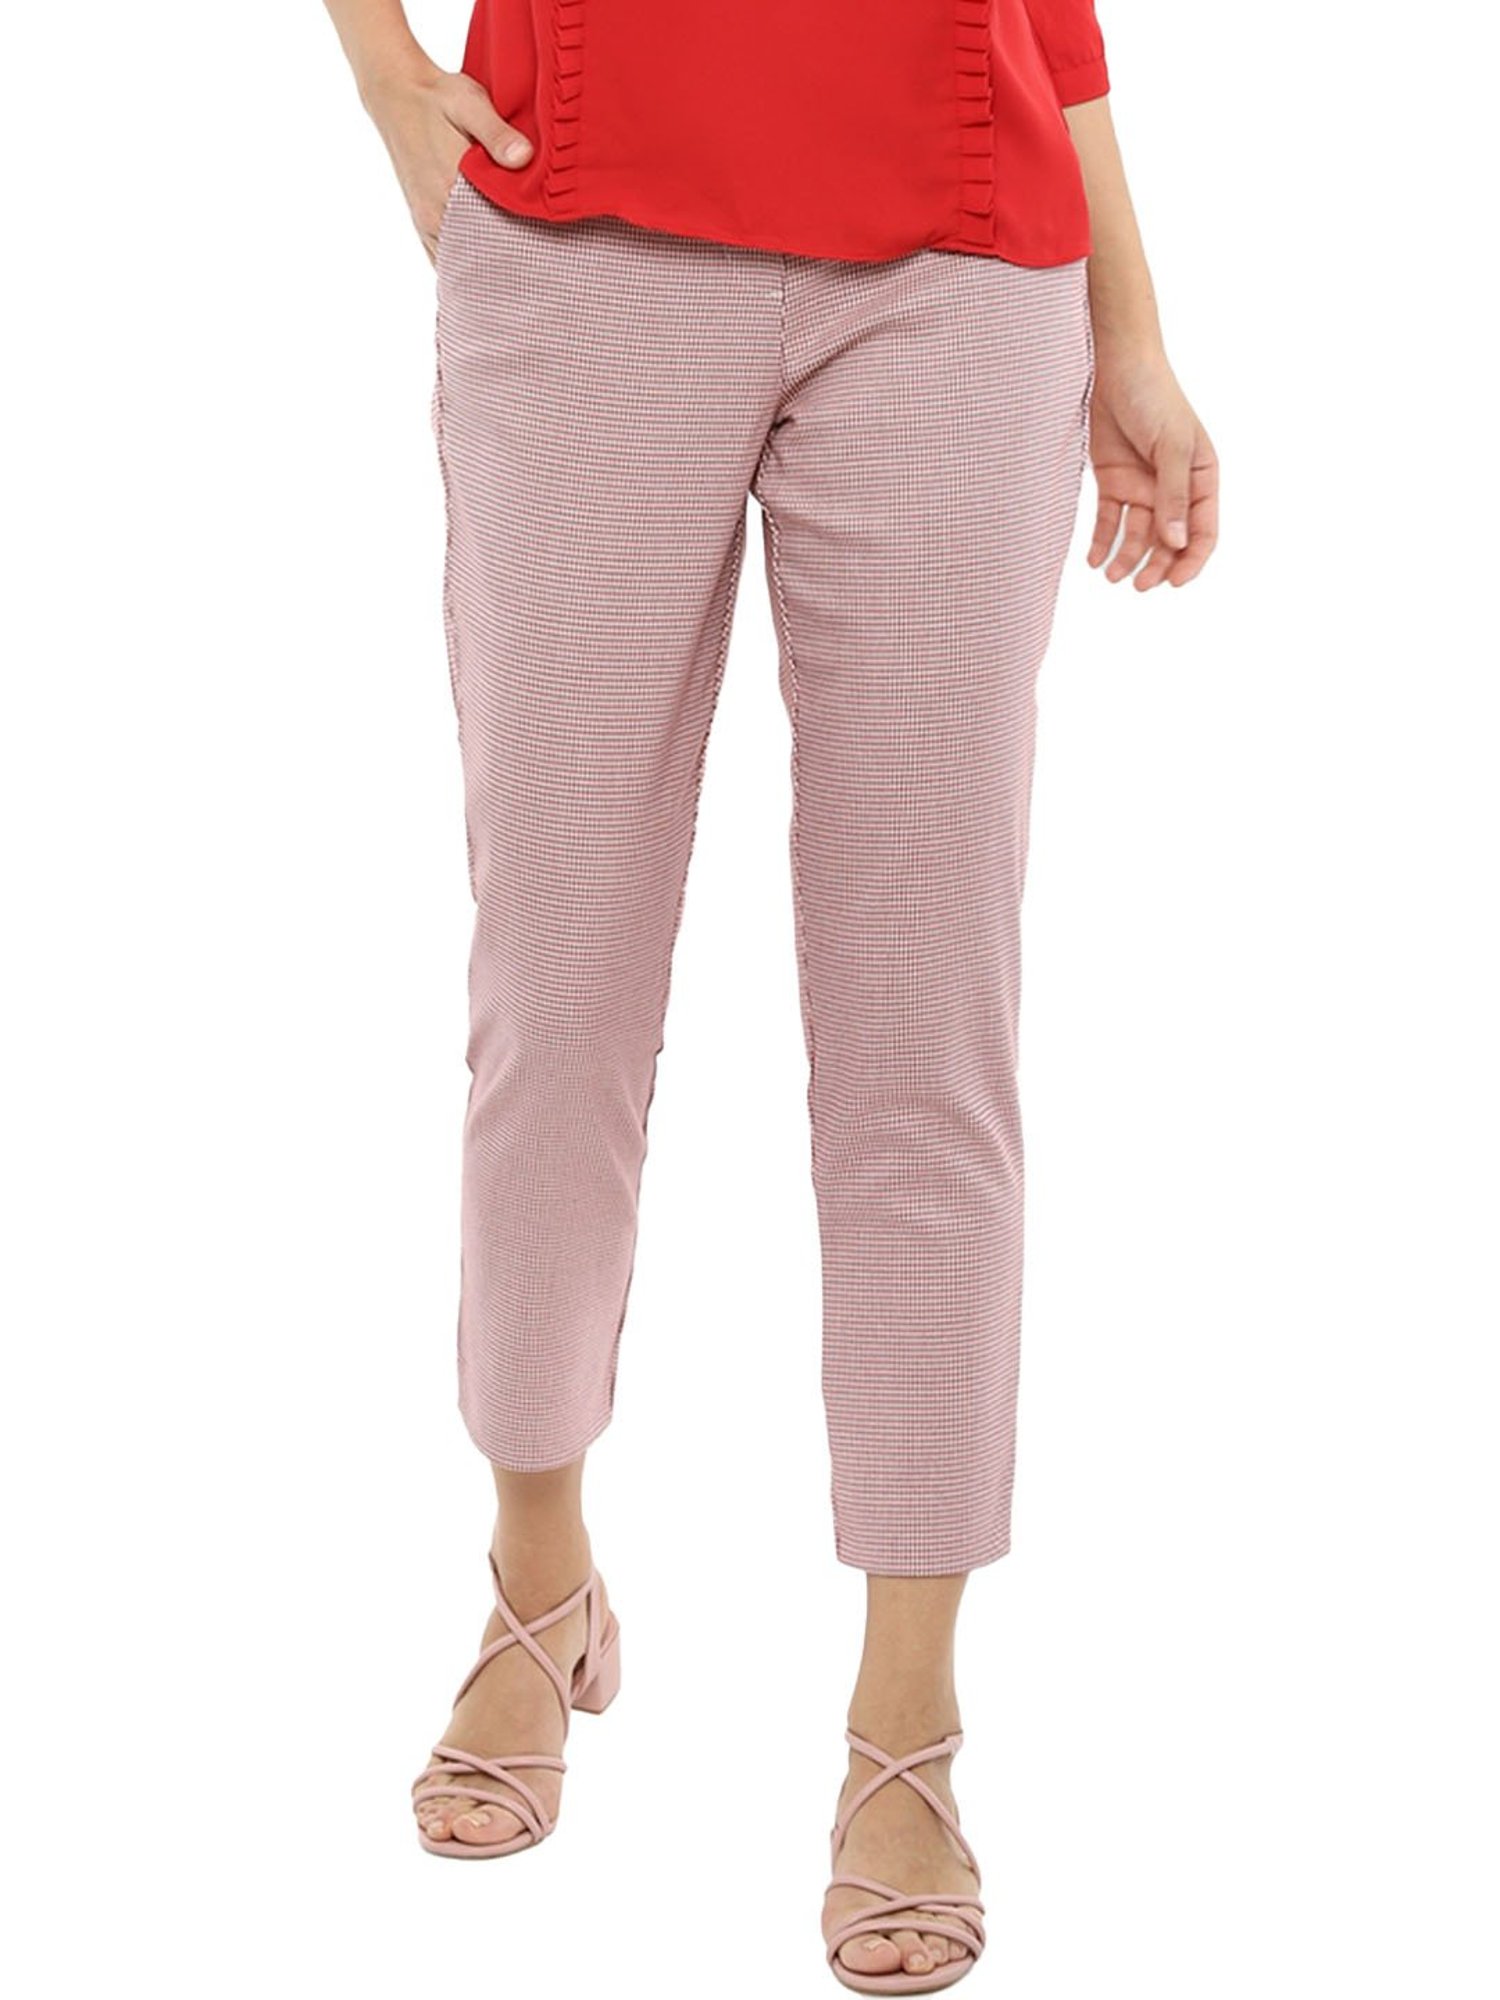 Fabnest Bottoms Pants and Trousers  Buy Fabnest Handloom Cotton Pink And  White Check Pants Online  Nykaa Fashion